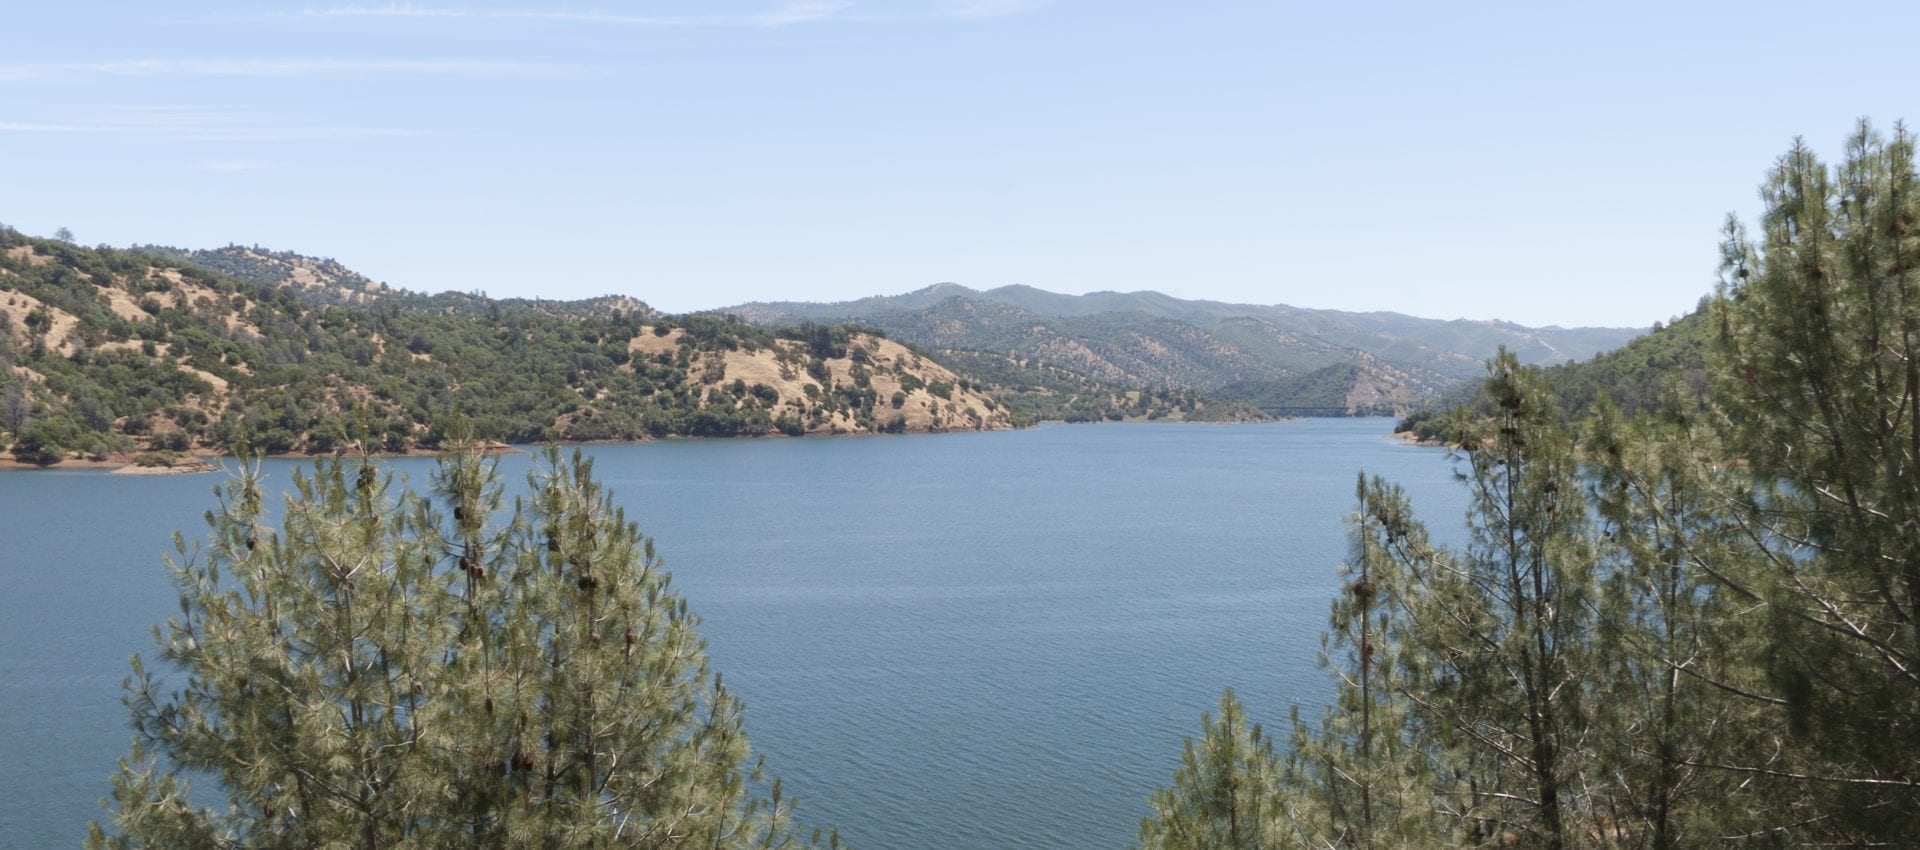 A view of New Melones lake in Central California. Photo take in late spring with a wide angle lens.